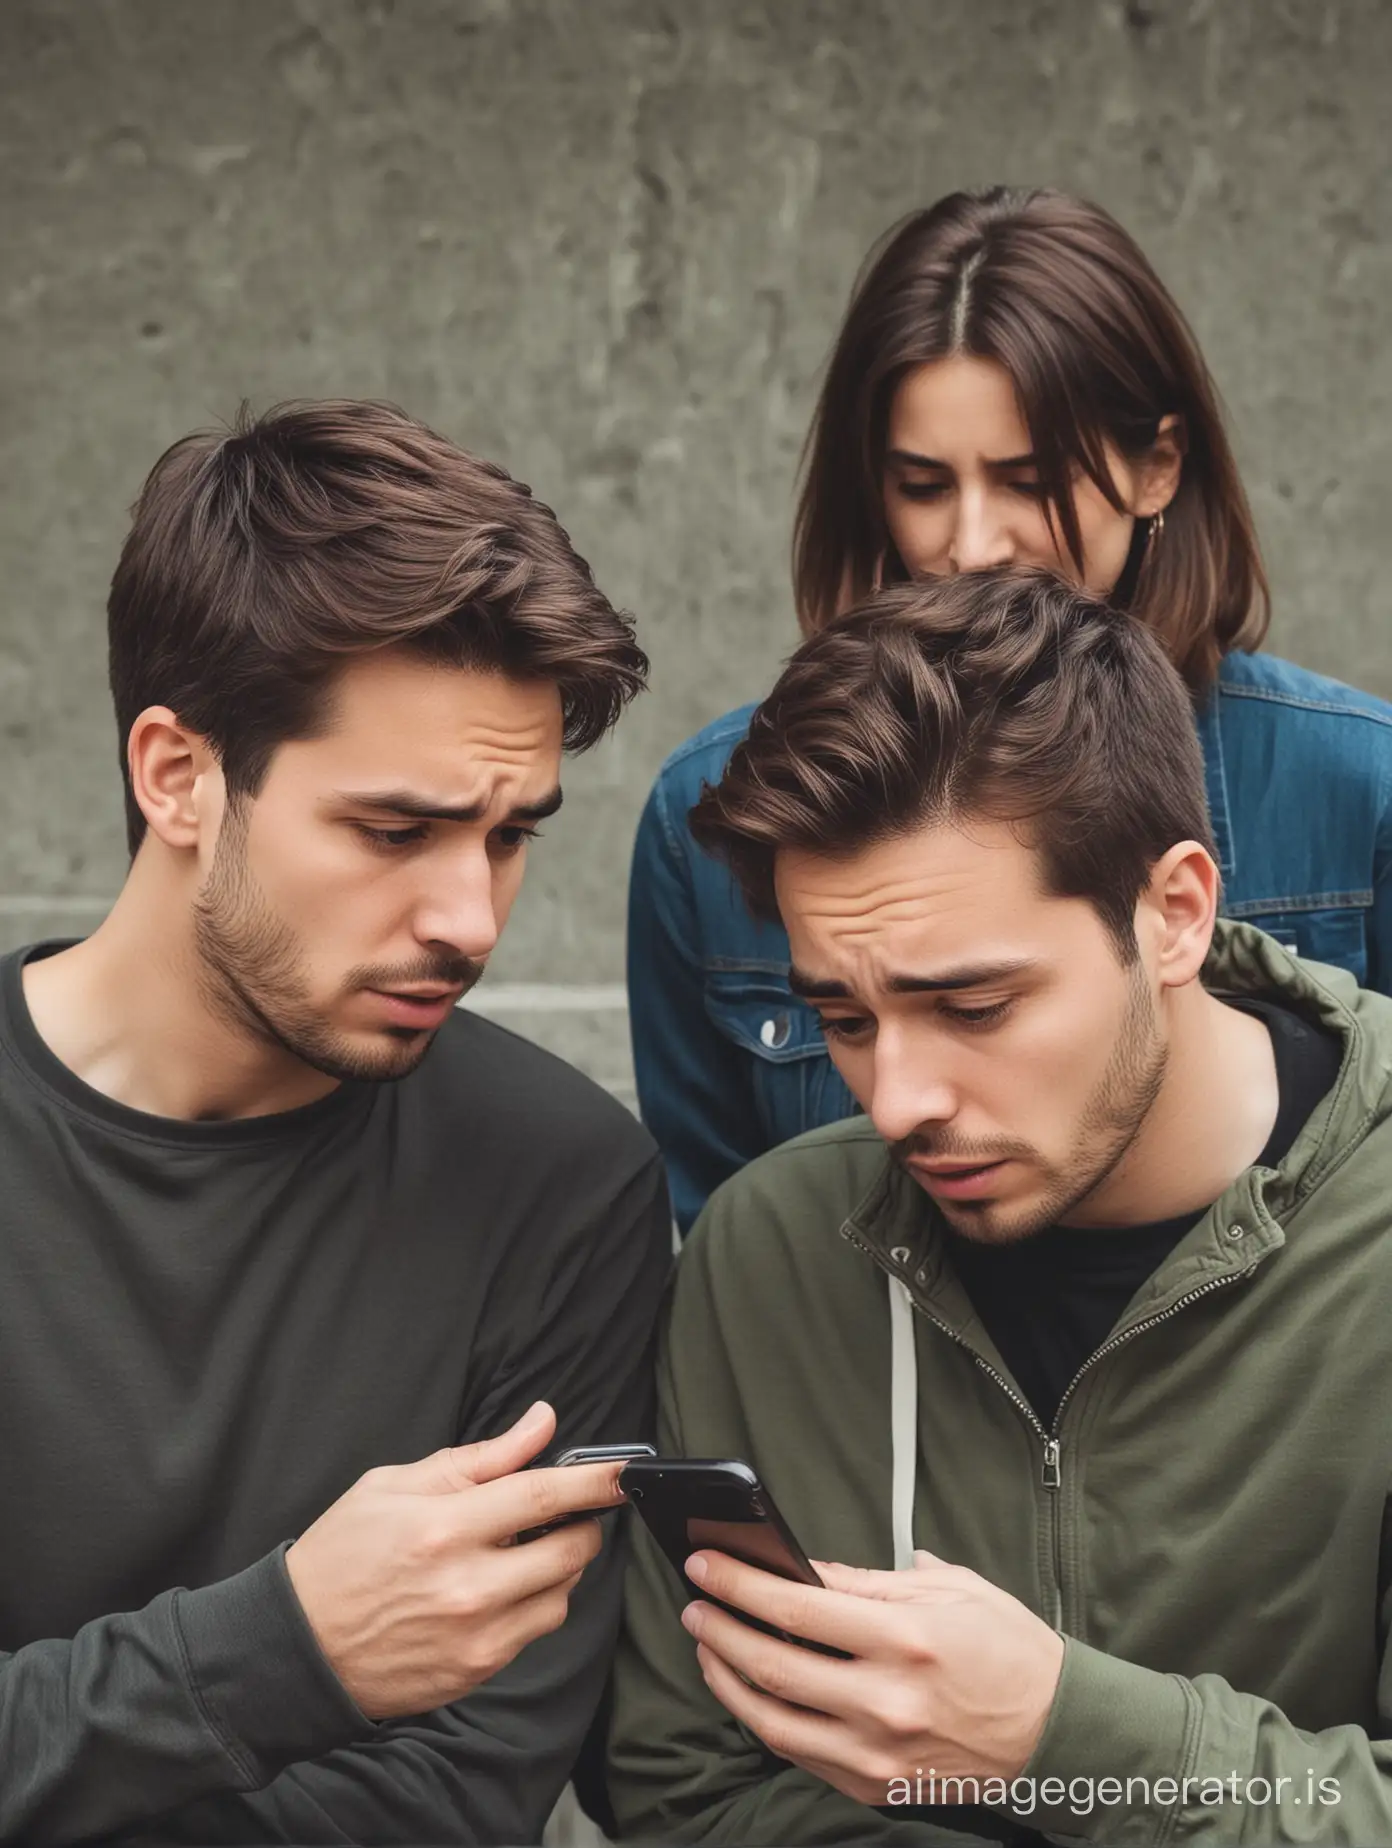 A friend is showing something on his mobile to another friend and both are worried